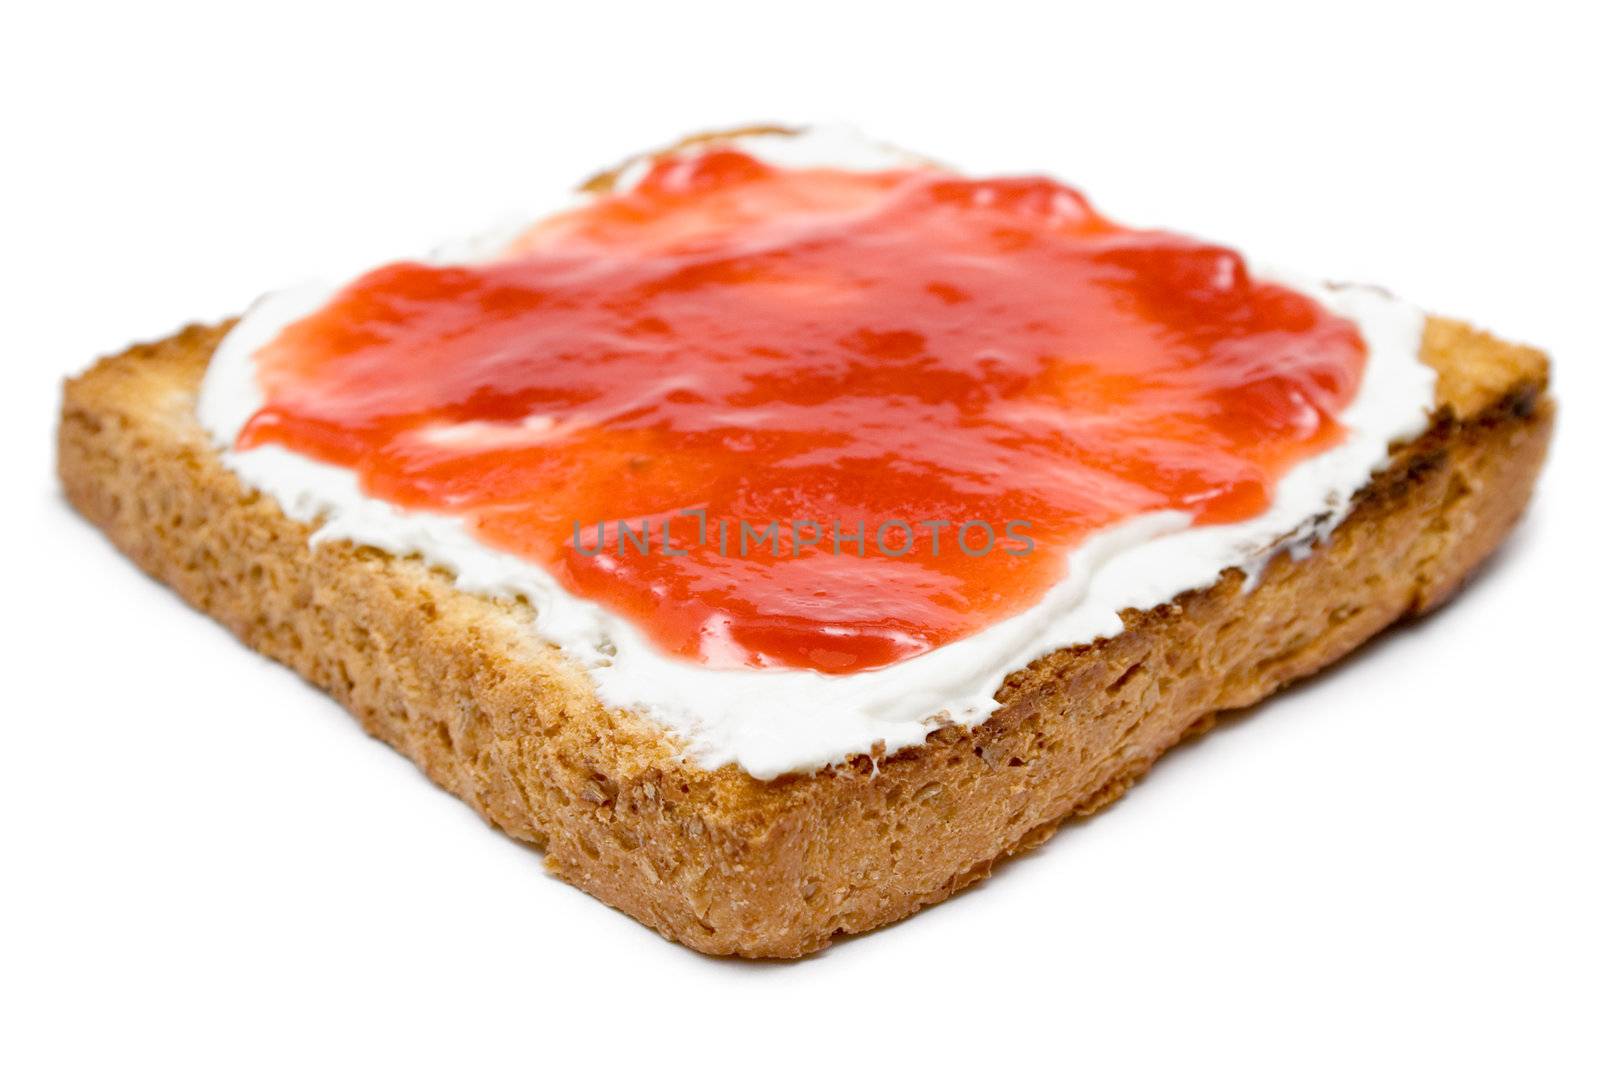 Butter and jam on a warm slice of bread. Isolated on a white background. Shallow depth of field.